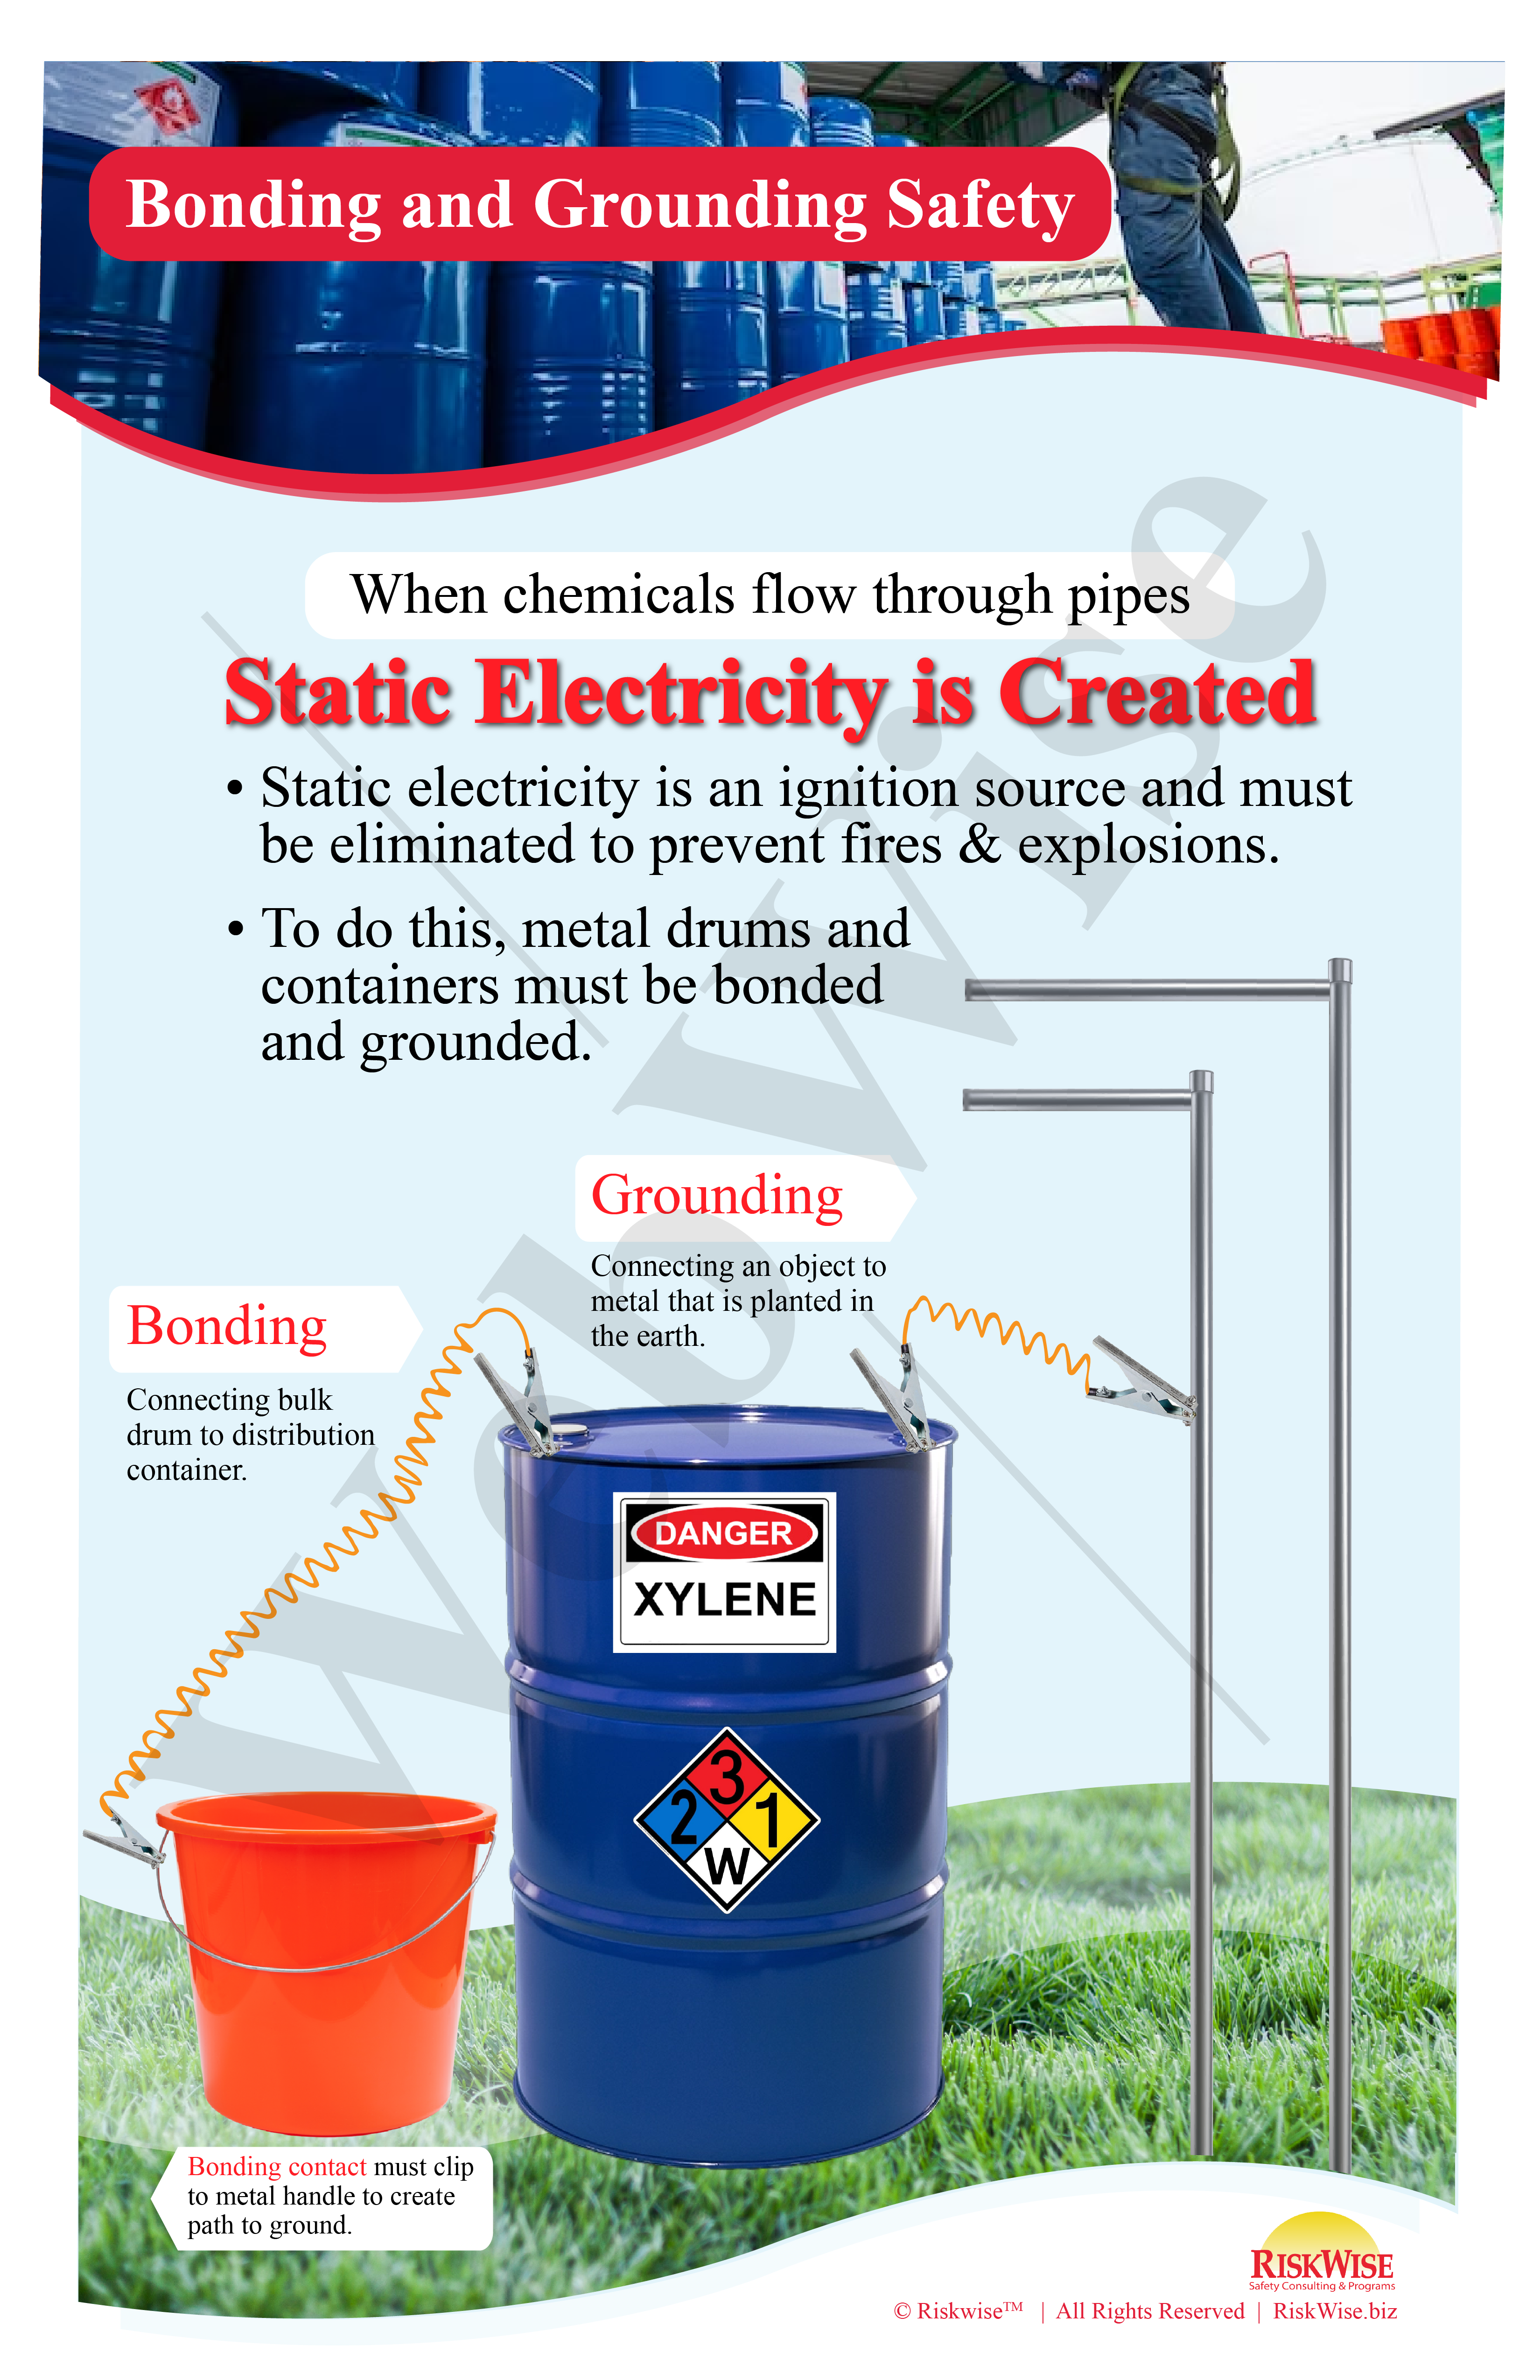 Bonding and Grounding Safety Poster